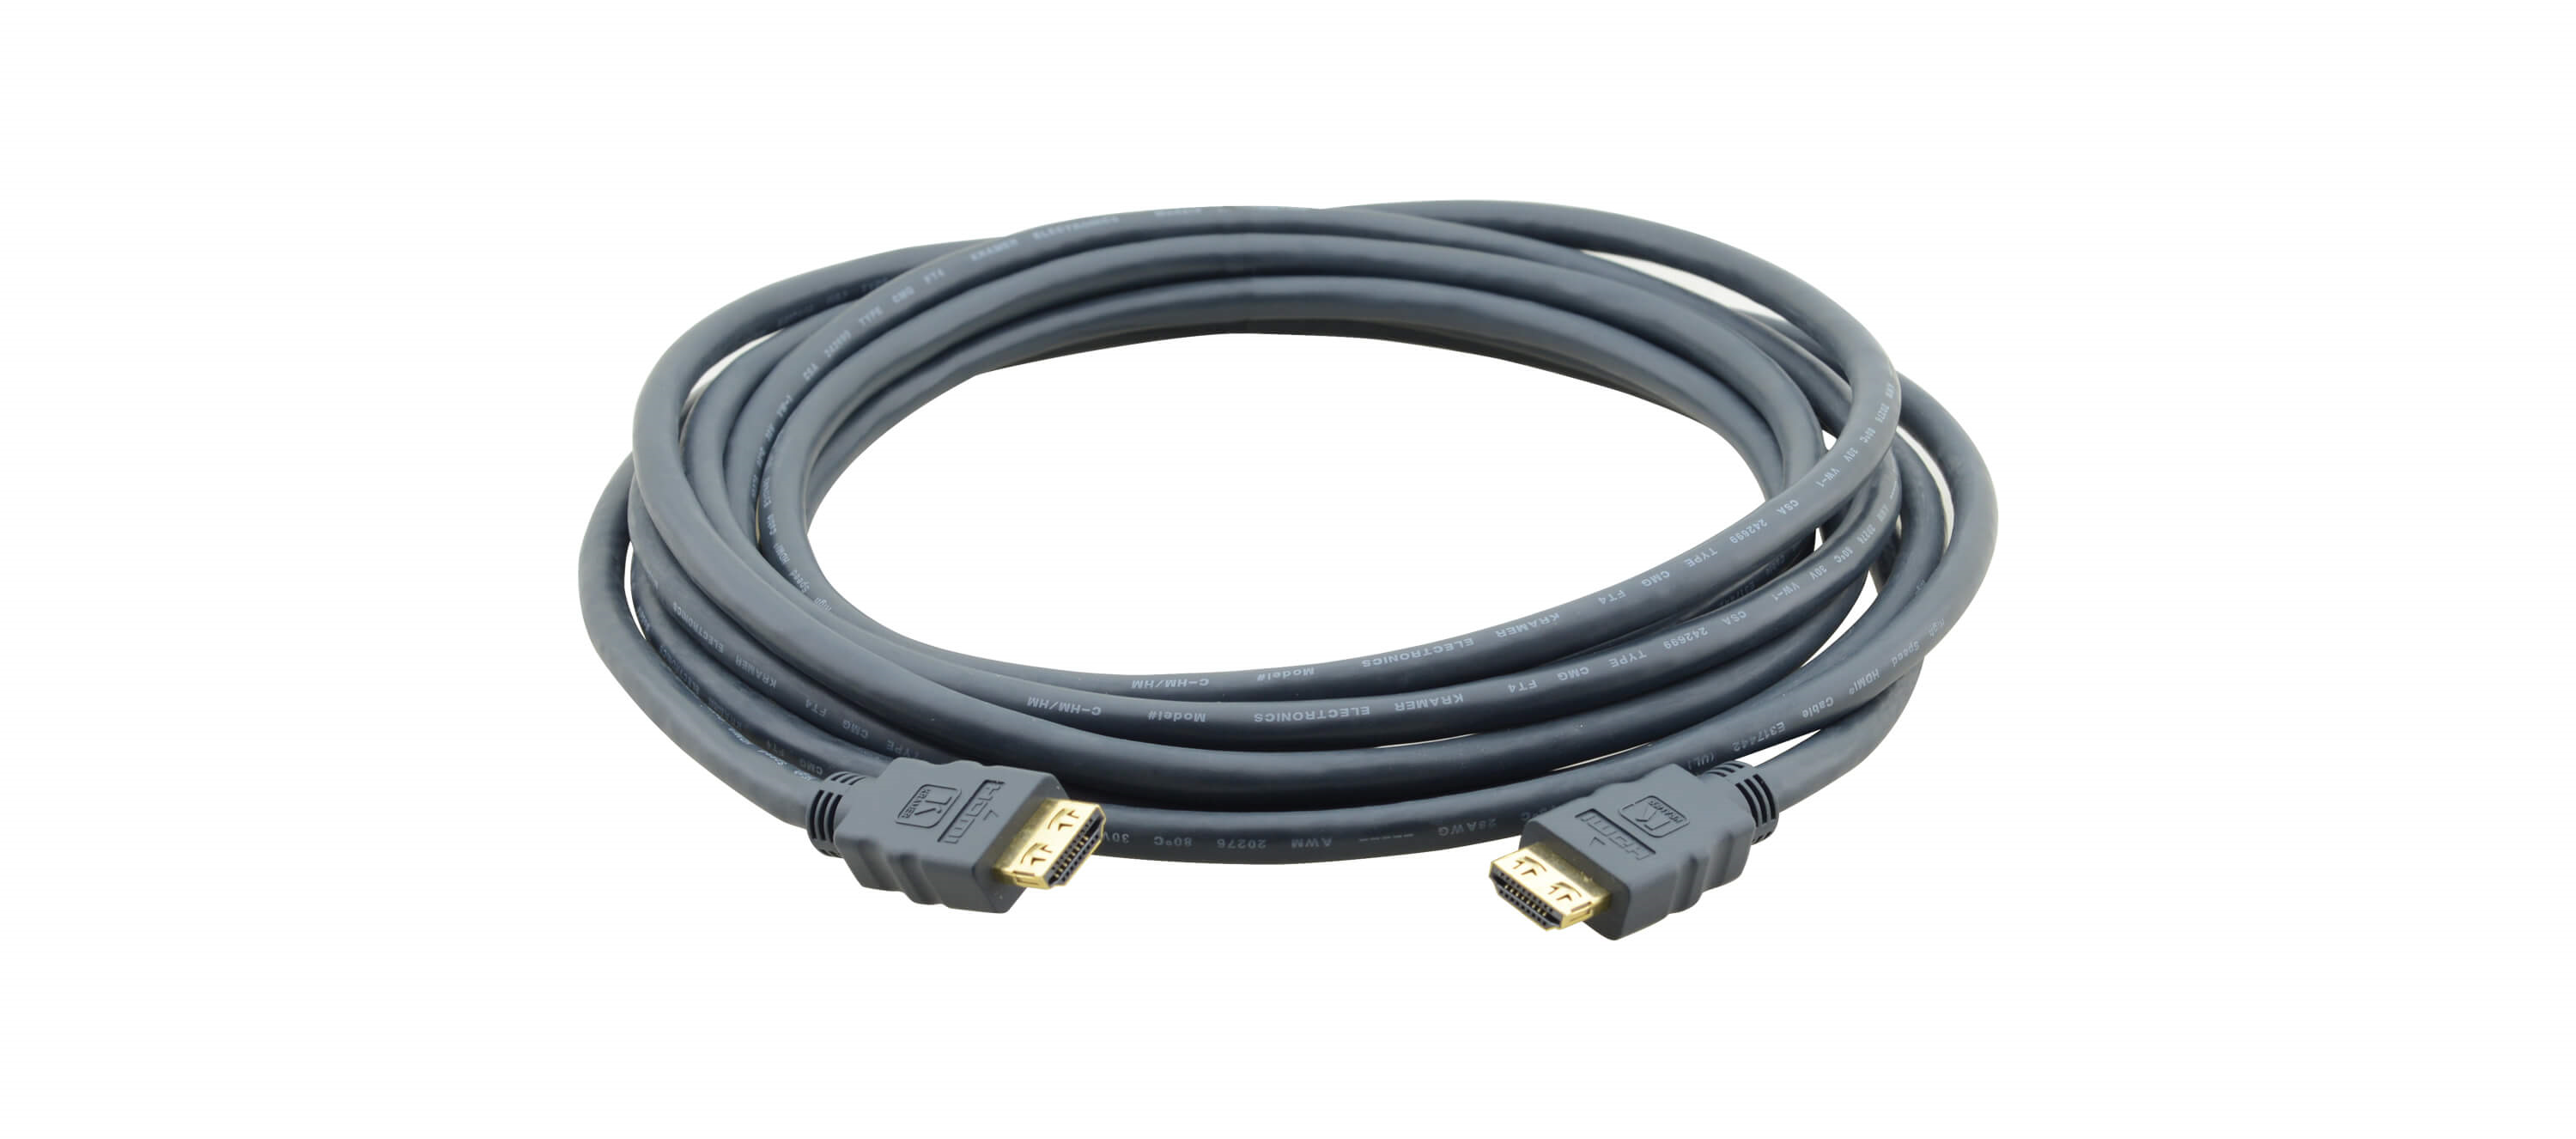 C-HM/HM/ETH-35 High–Speed HDMI Cable with Ethernet - 35'